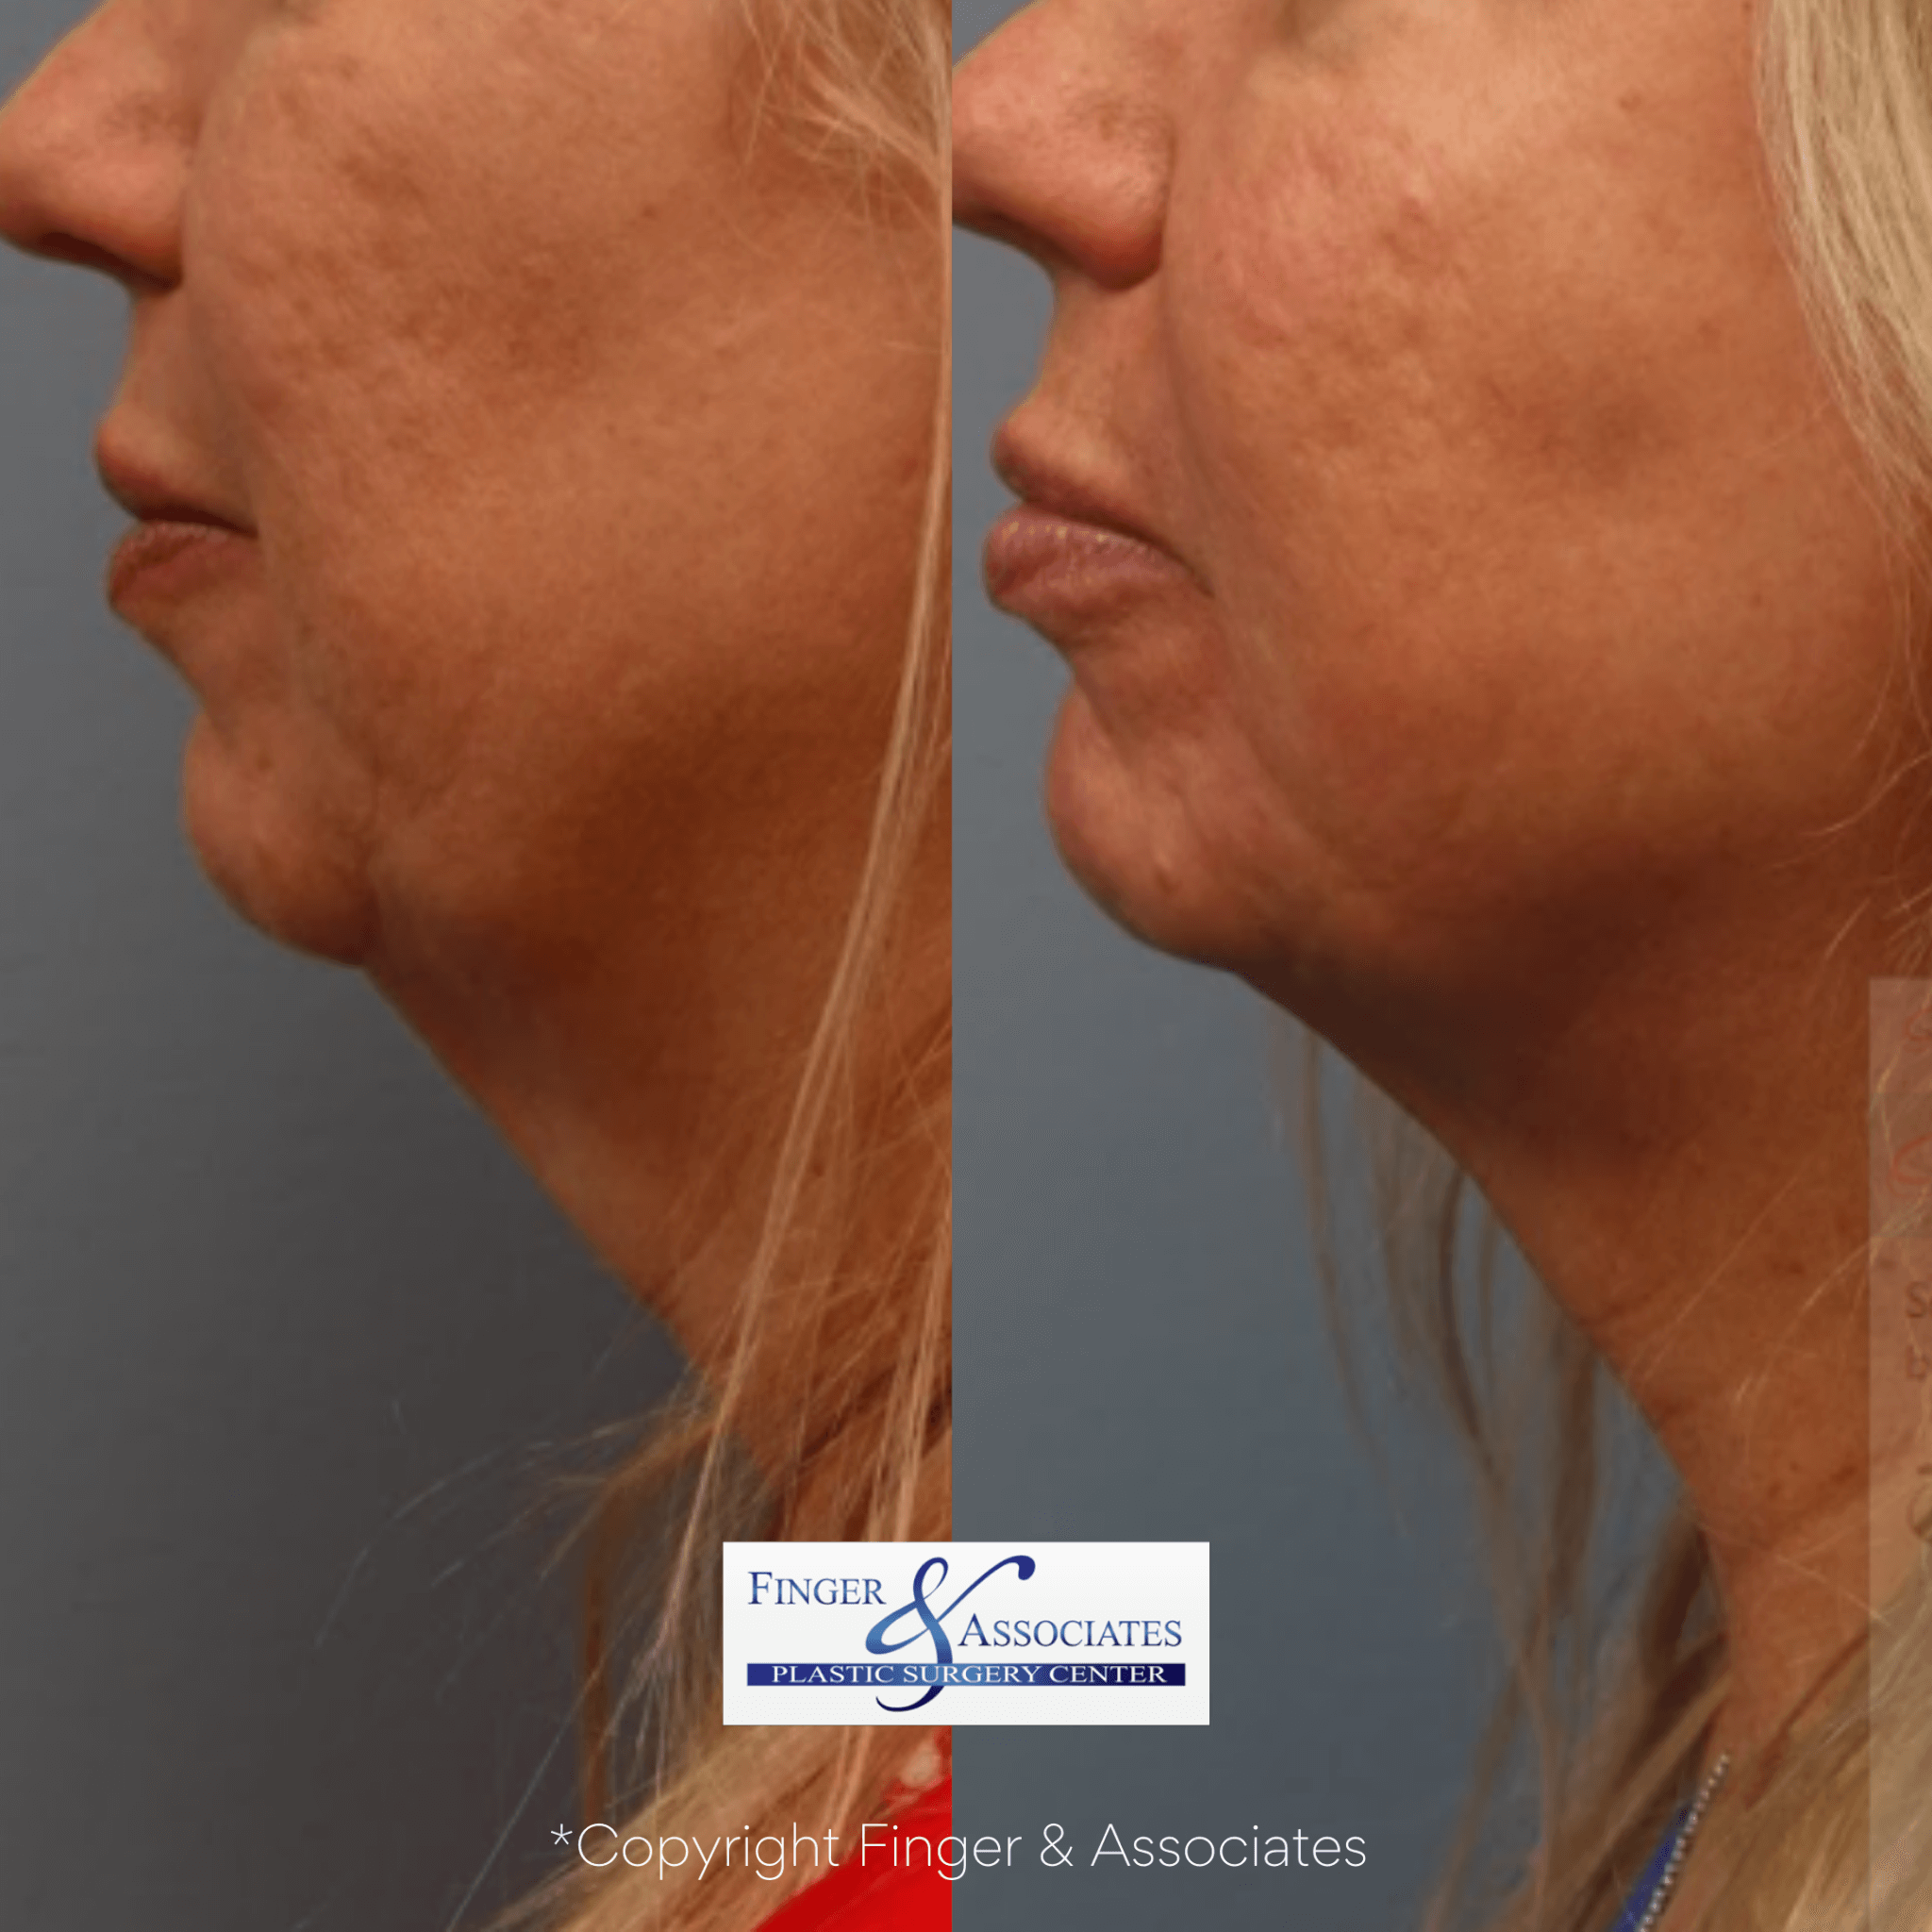 Before and after neck iposuction and thermitight for skin tightening